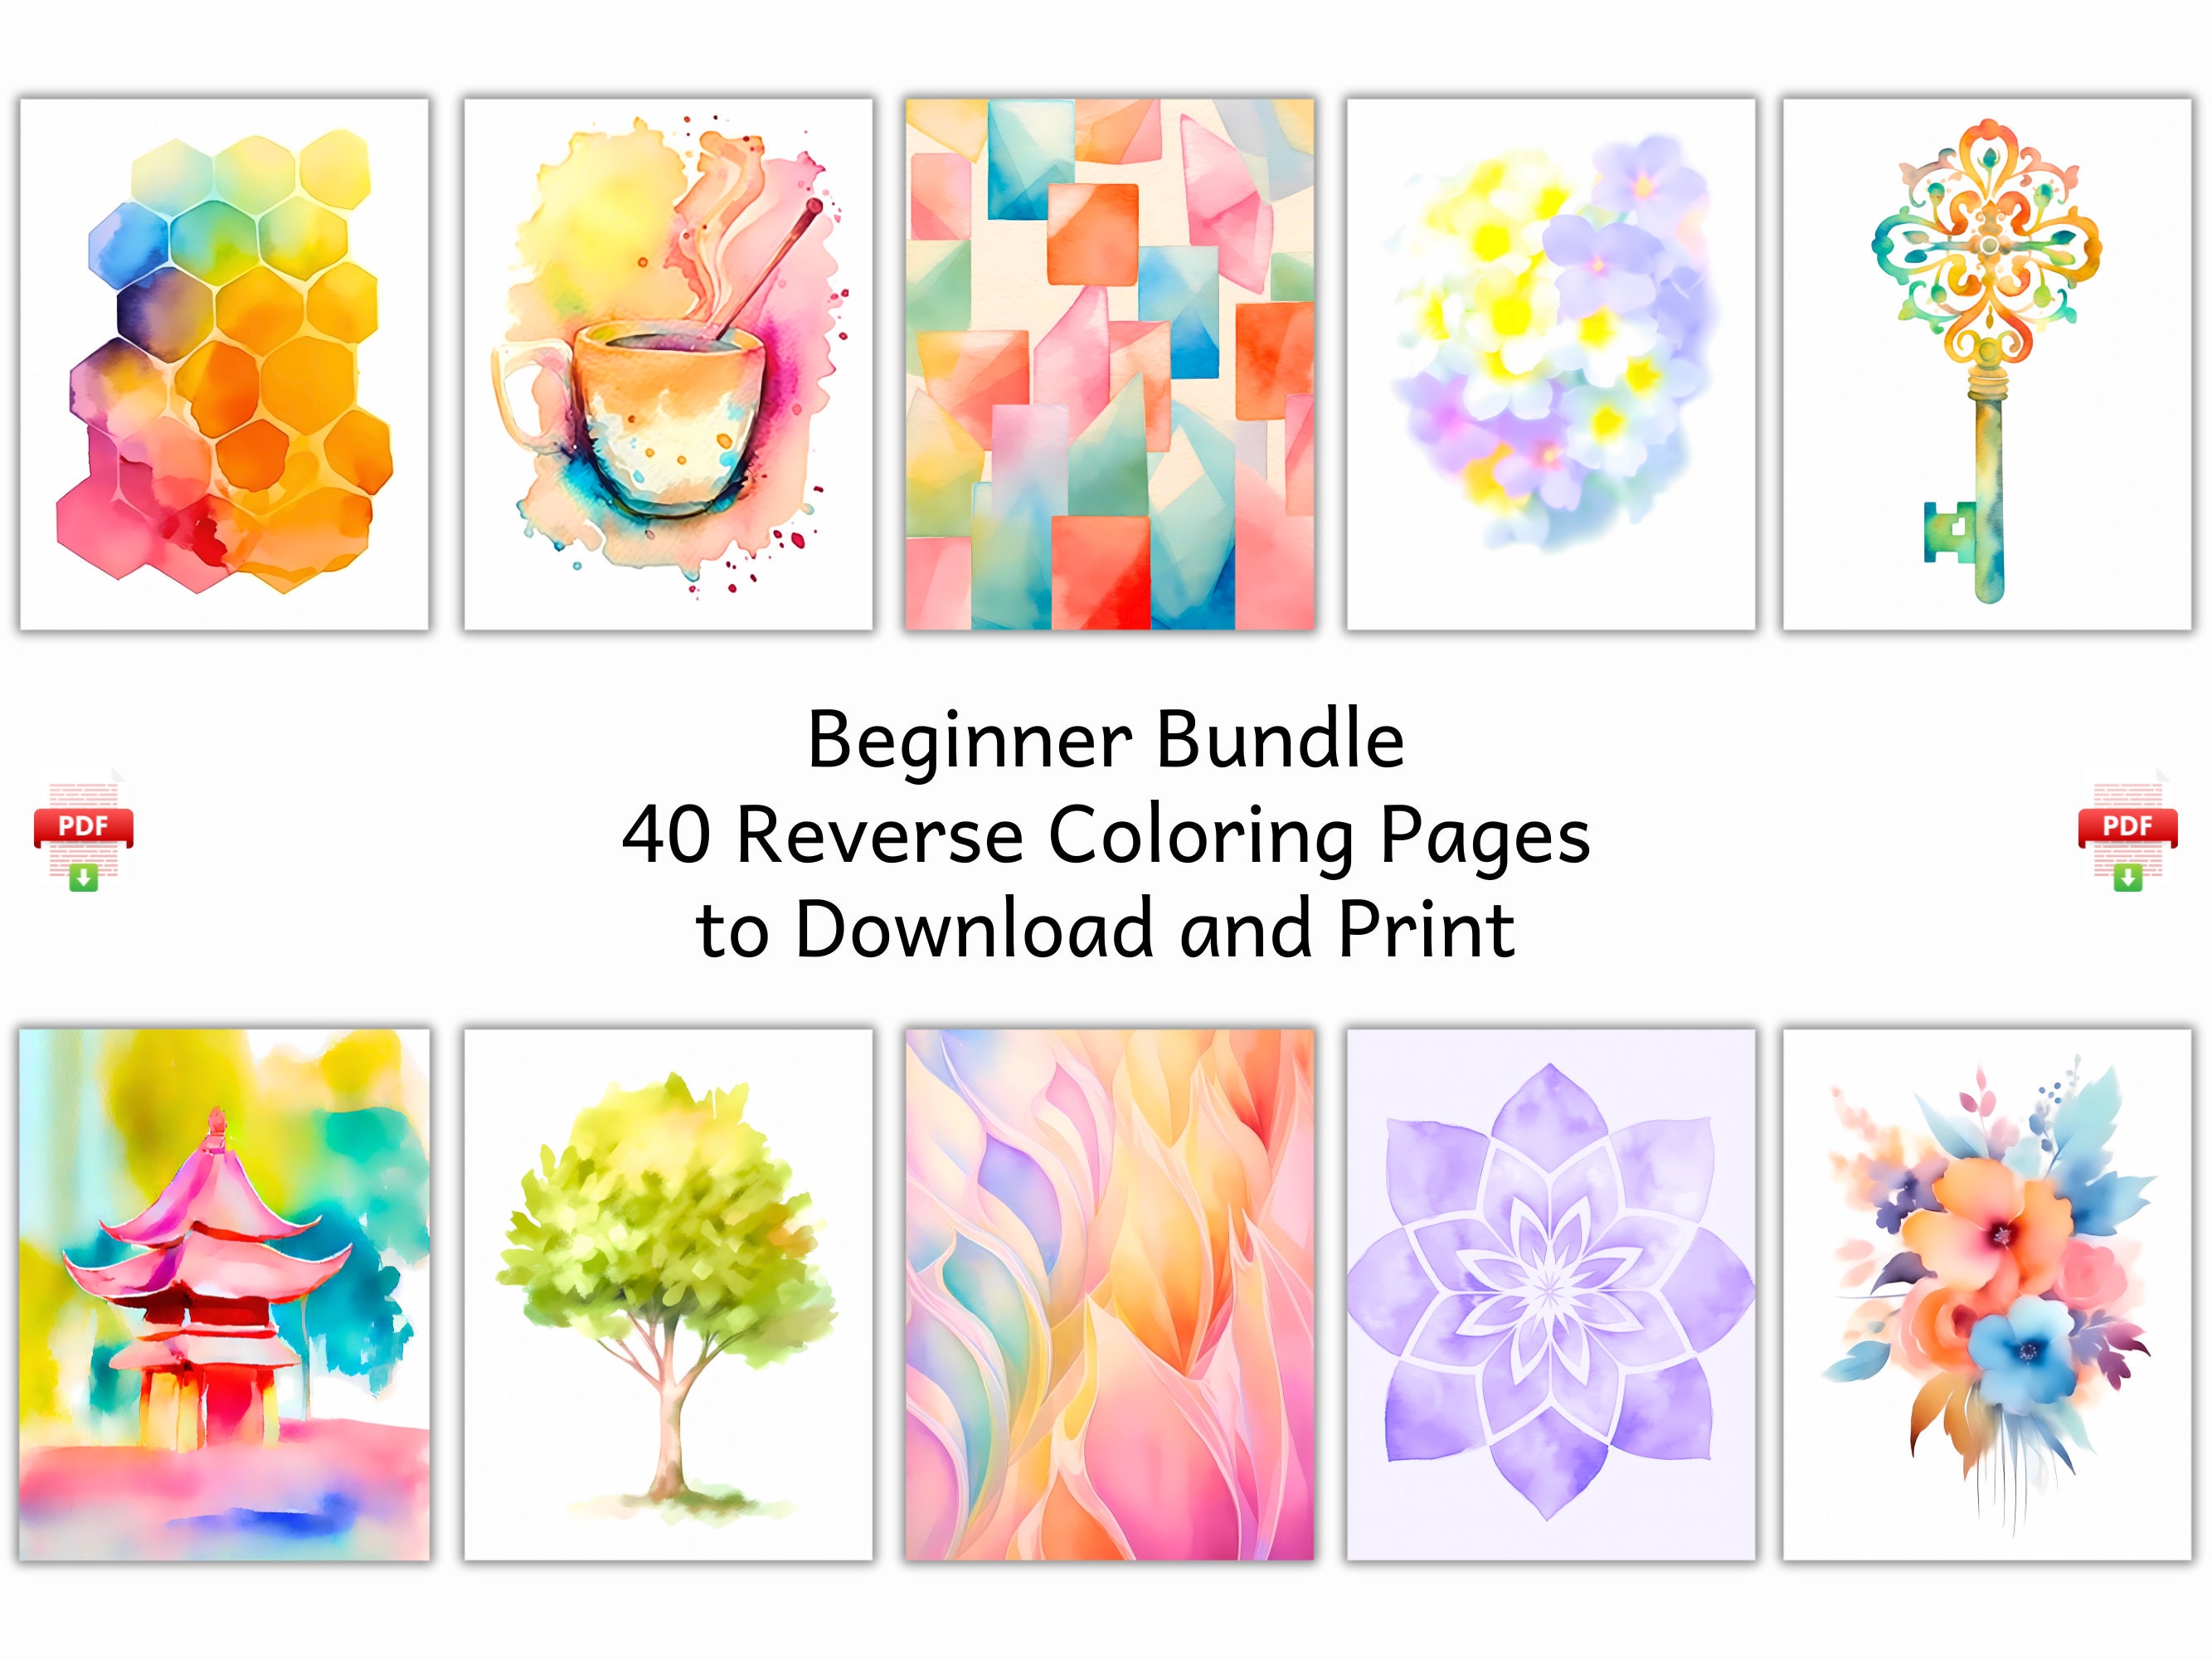 Reverse Coloring Book For Beginners. Zentangle Edition: We've Got Colors,  You've Got Lines to Trace! Zentangle Patterns Coloring Book in Reverse